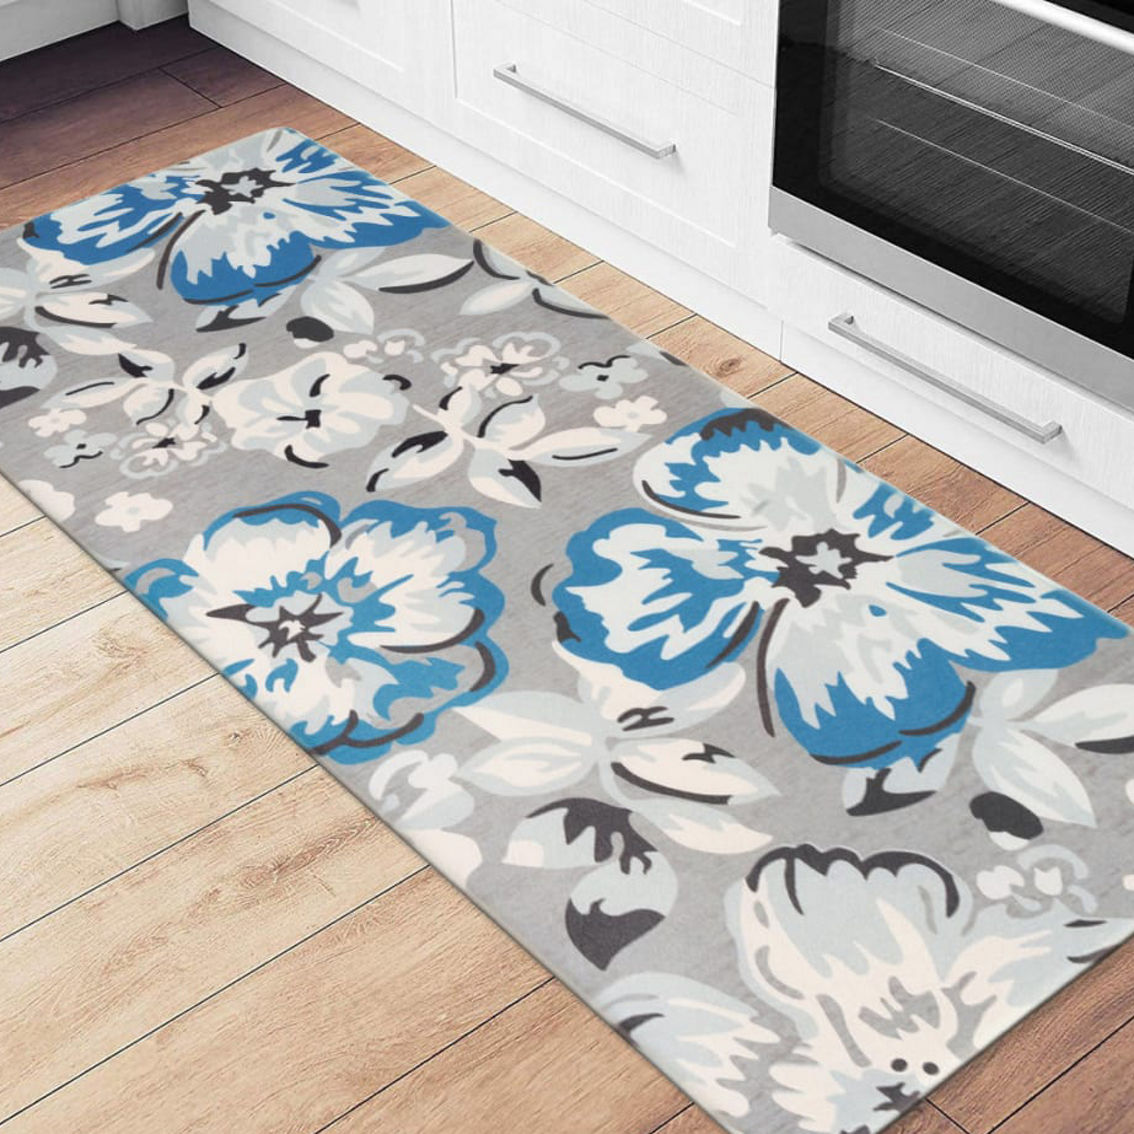 World Rug Gallery Modern Floral Anti Fatigue Standing Mat - Image 2 of 5